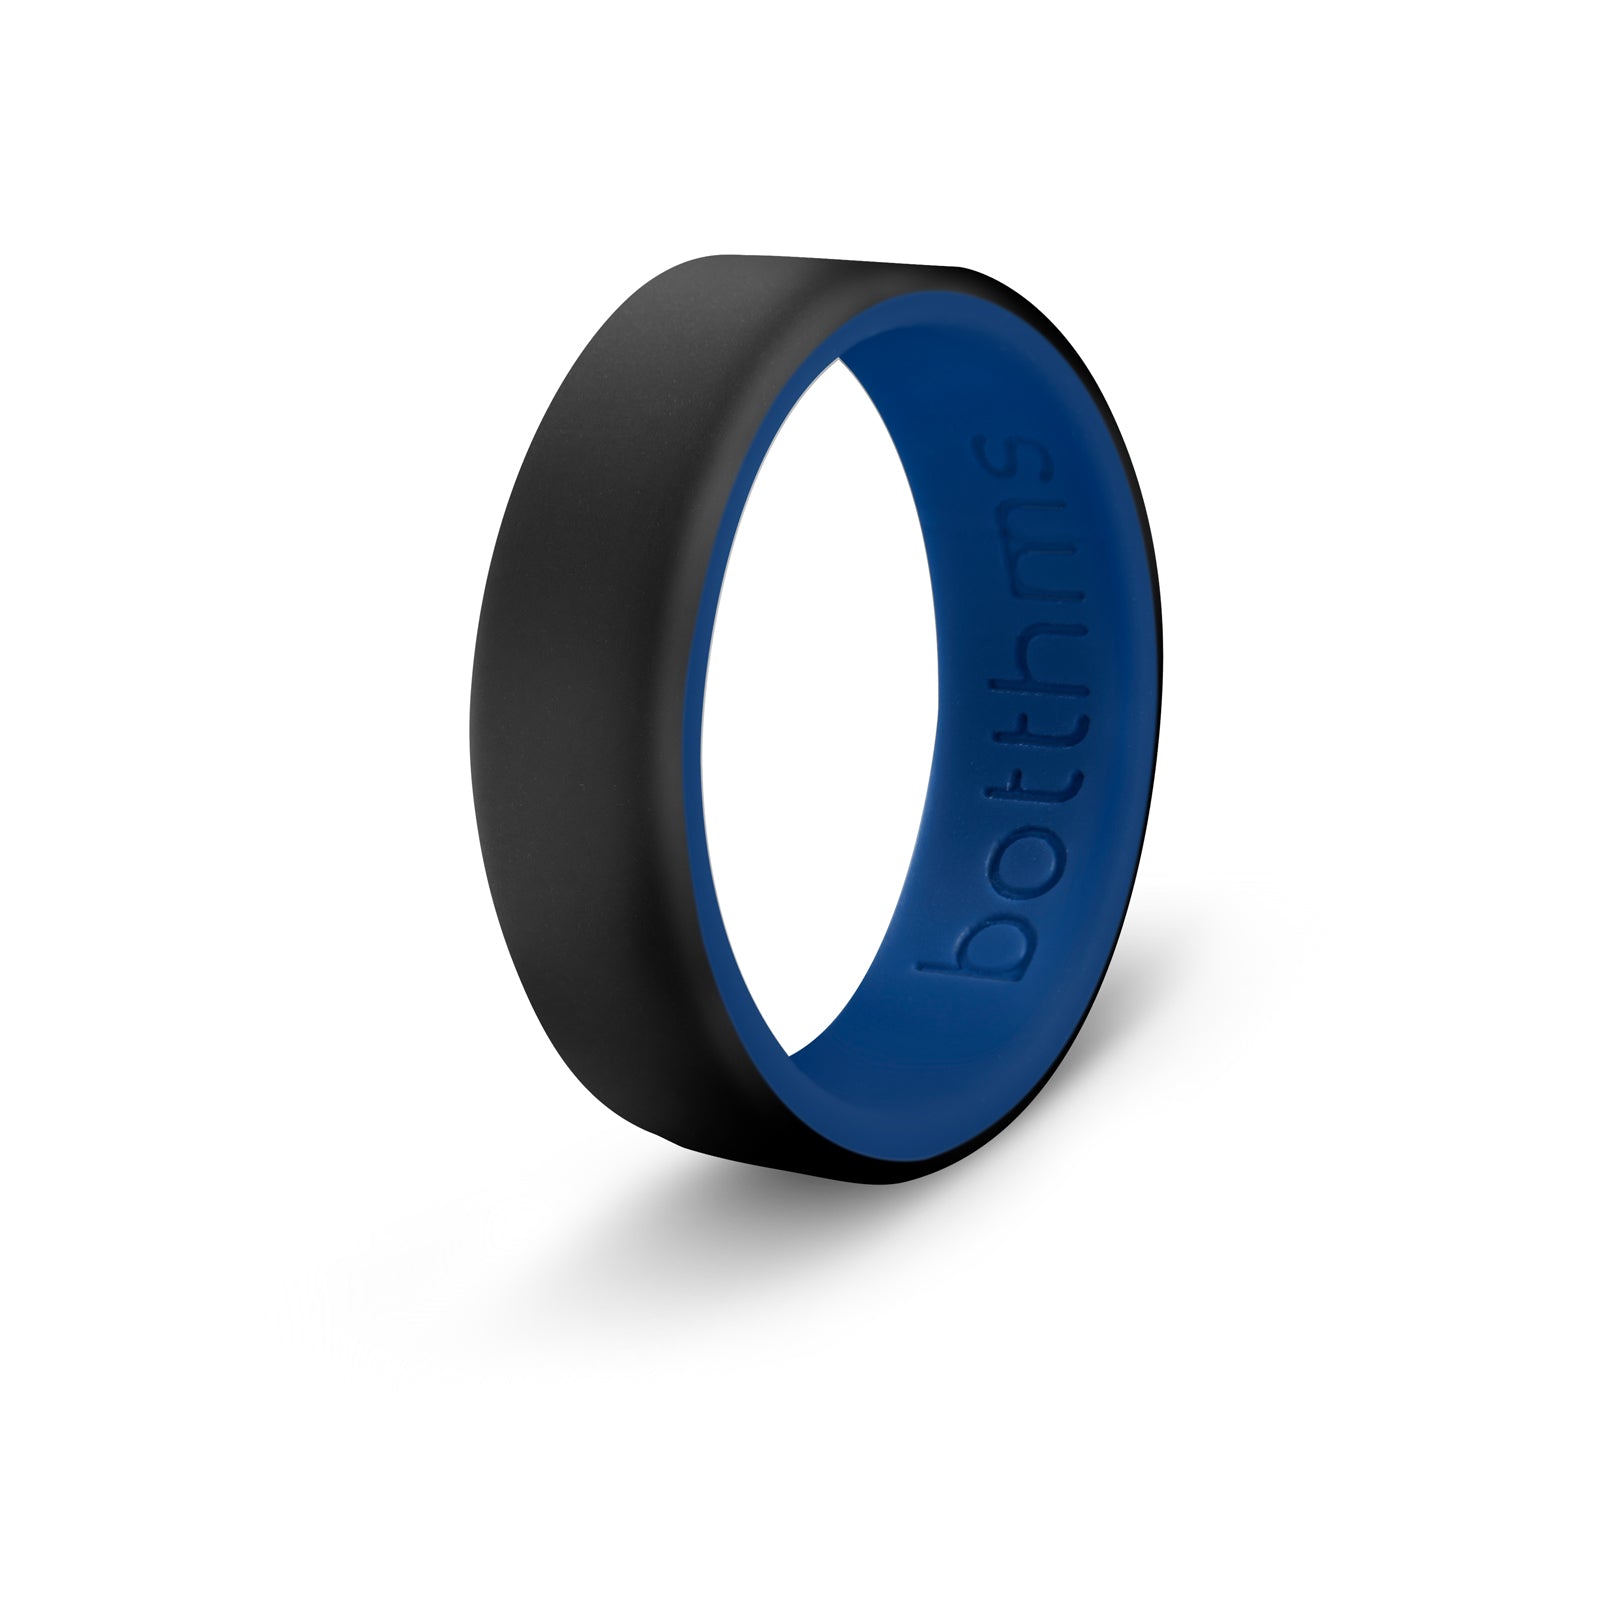 botthms botthms Double Blue Silicone Ring Silicone Rings